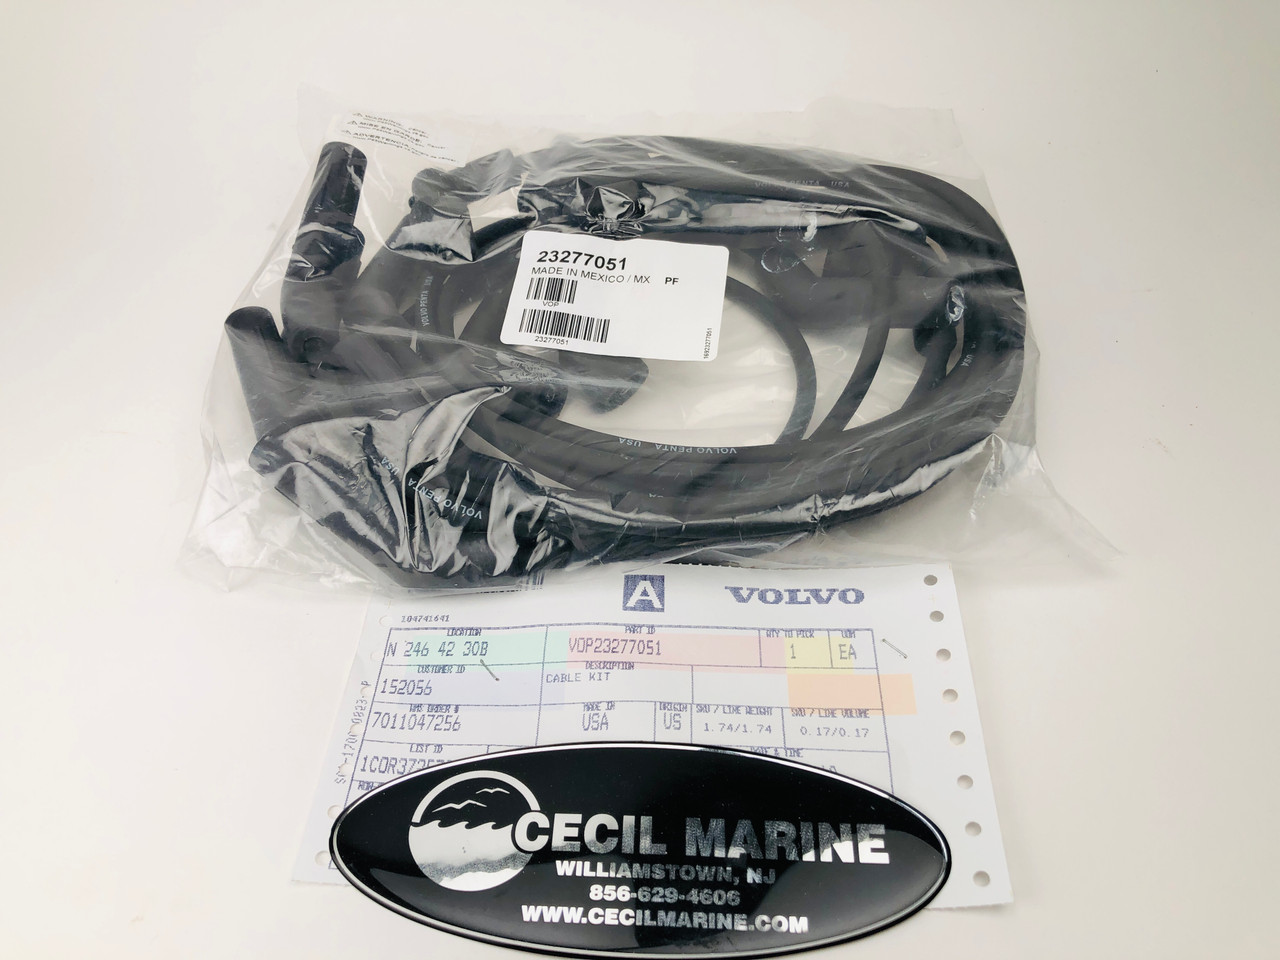 $299.99* GENUINE VOLVO no tax* IGNITION CABLE KIT 23277051 *In Stock & Ready To Ship!